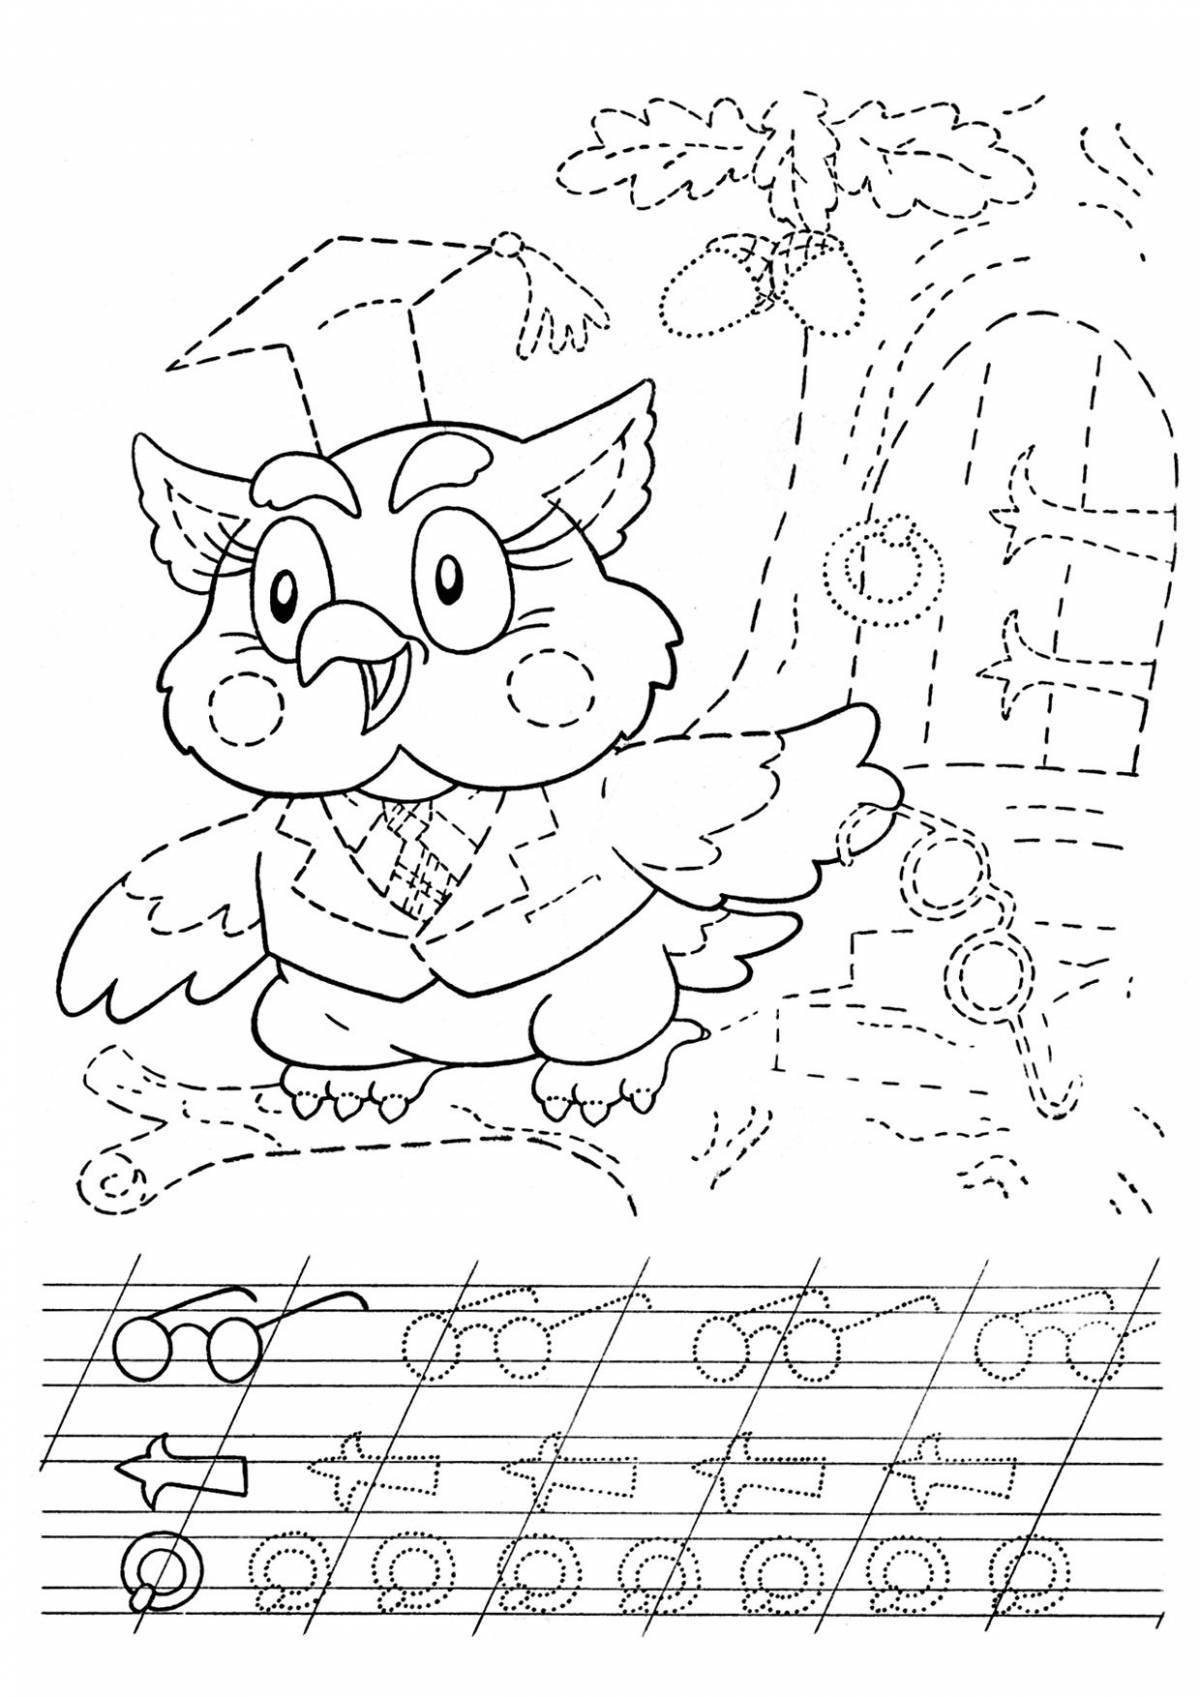 Creative coloring book smart for 6-7 year olds